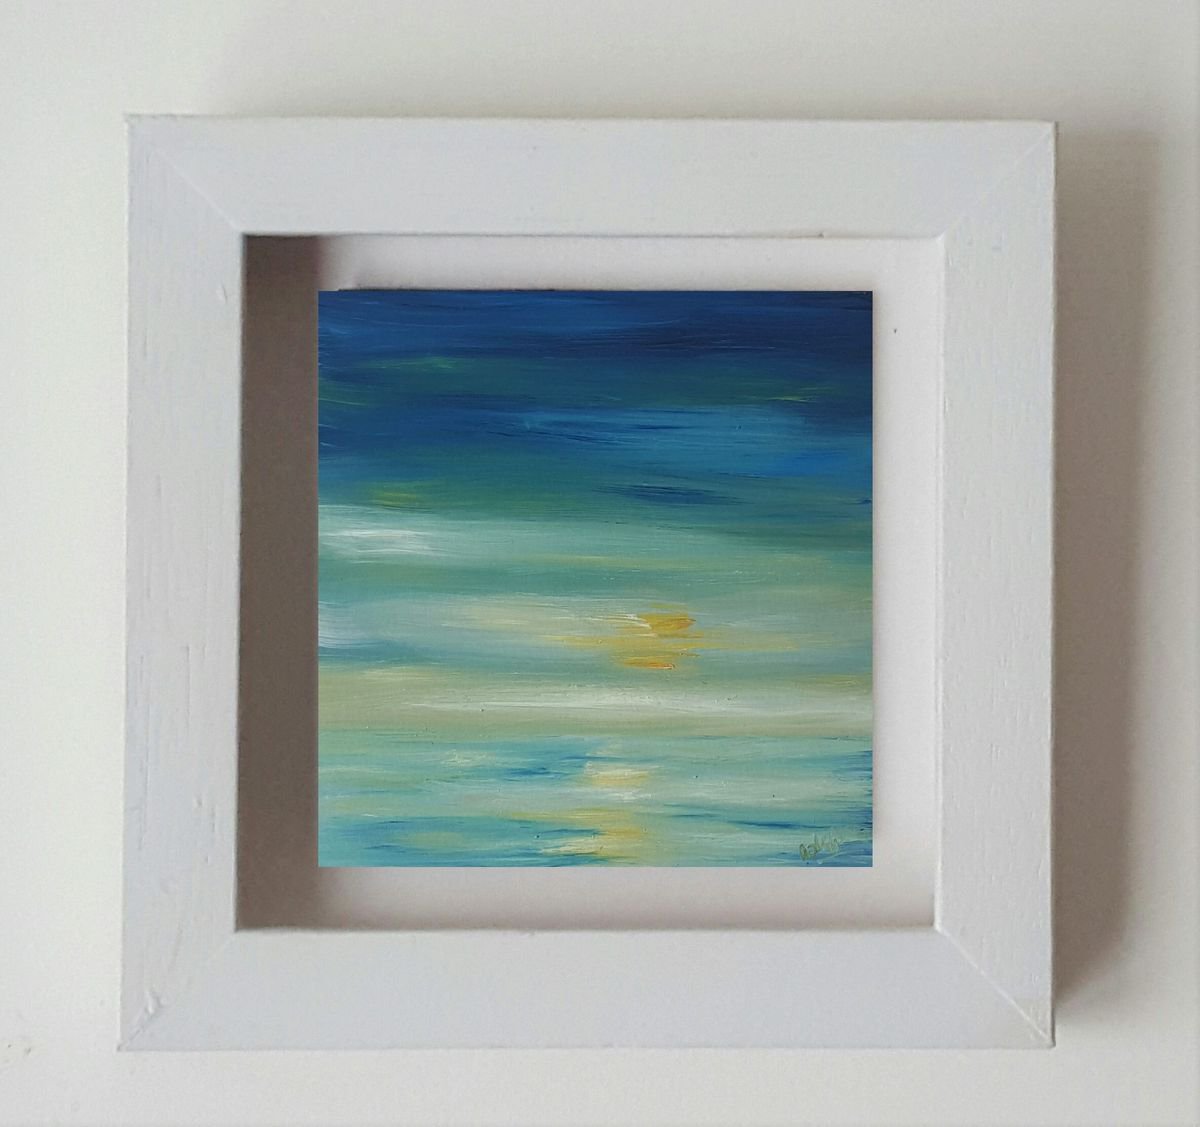 Hazy Morning Blues - Semi Abstract Sunrise seascape by Niki Purcell